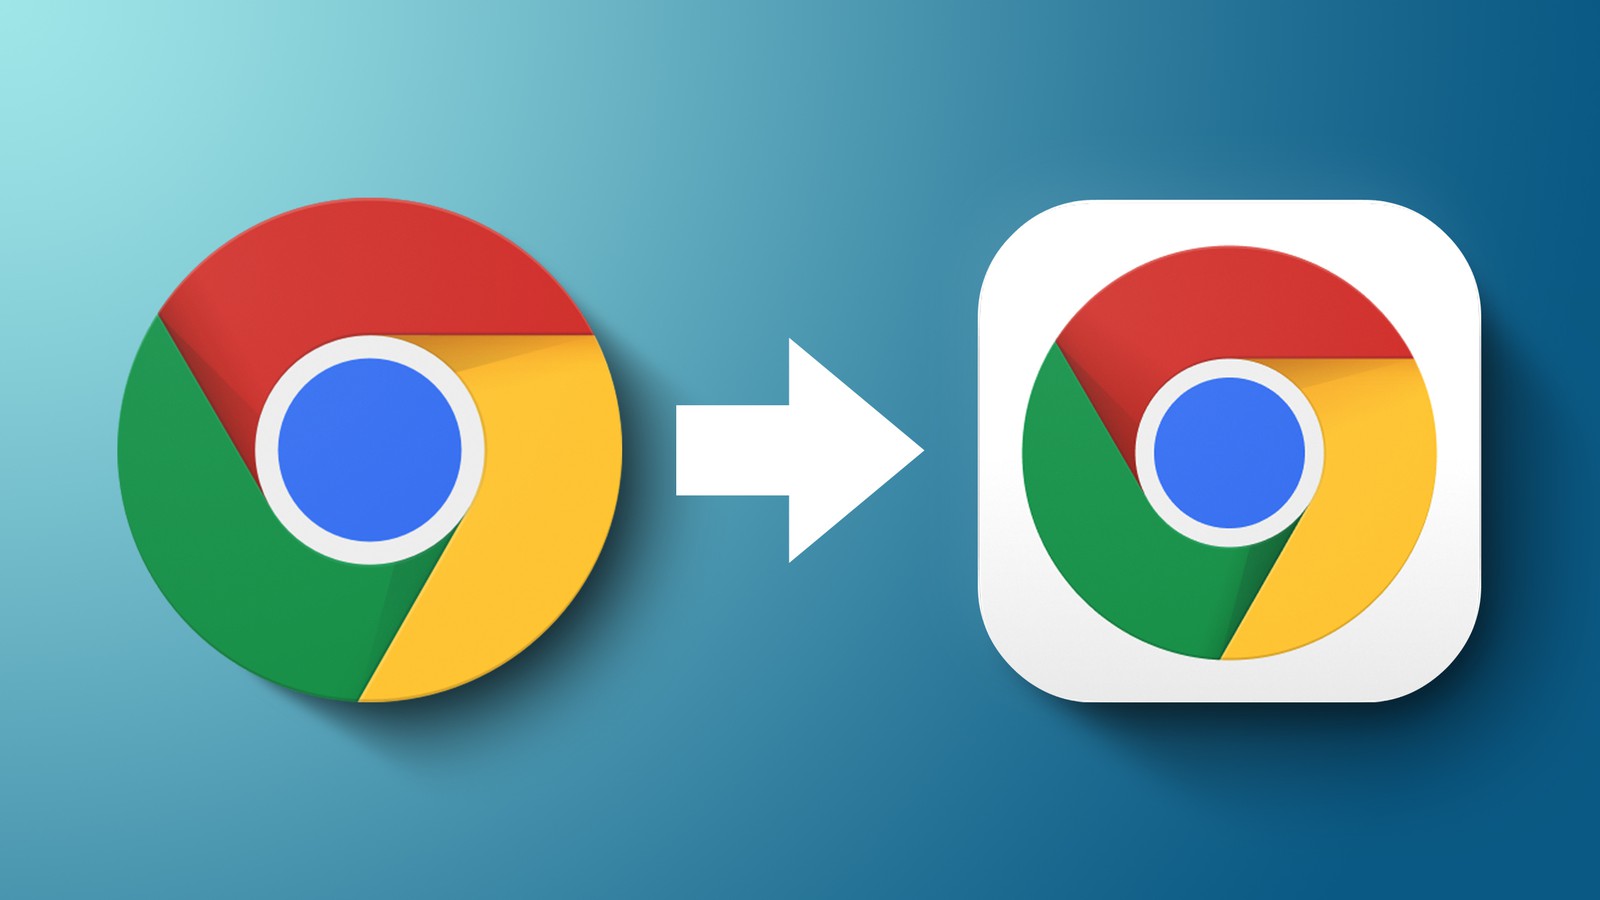 how to get chrome browser on mac